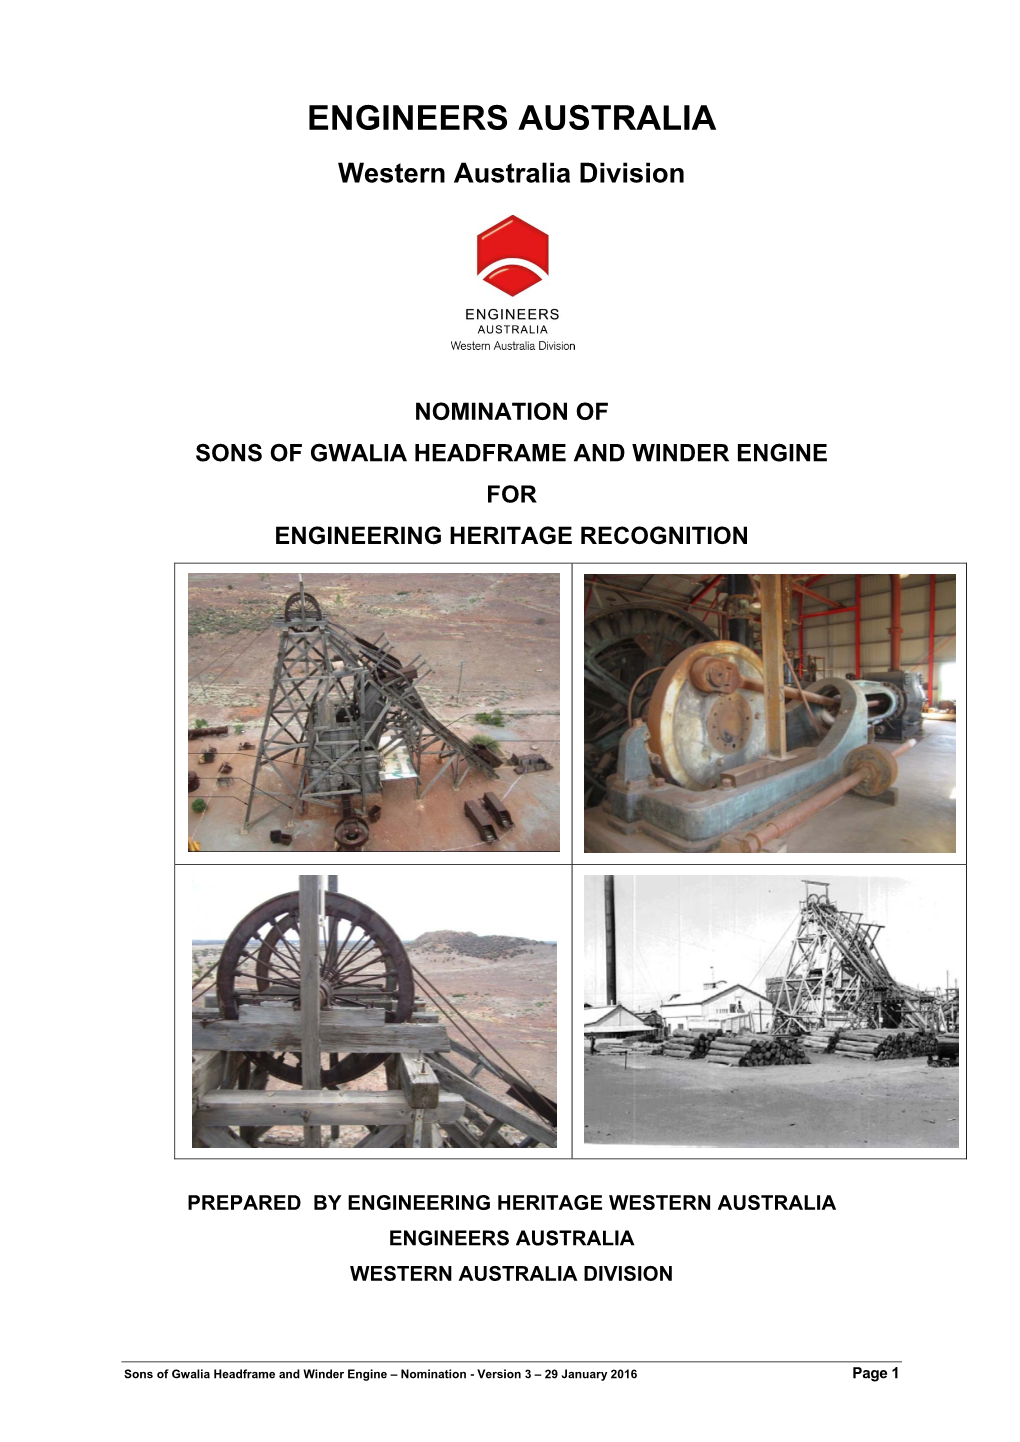 Sons of Gwalia Headframe and Winder Engine for Engineering Heritage Recognition